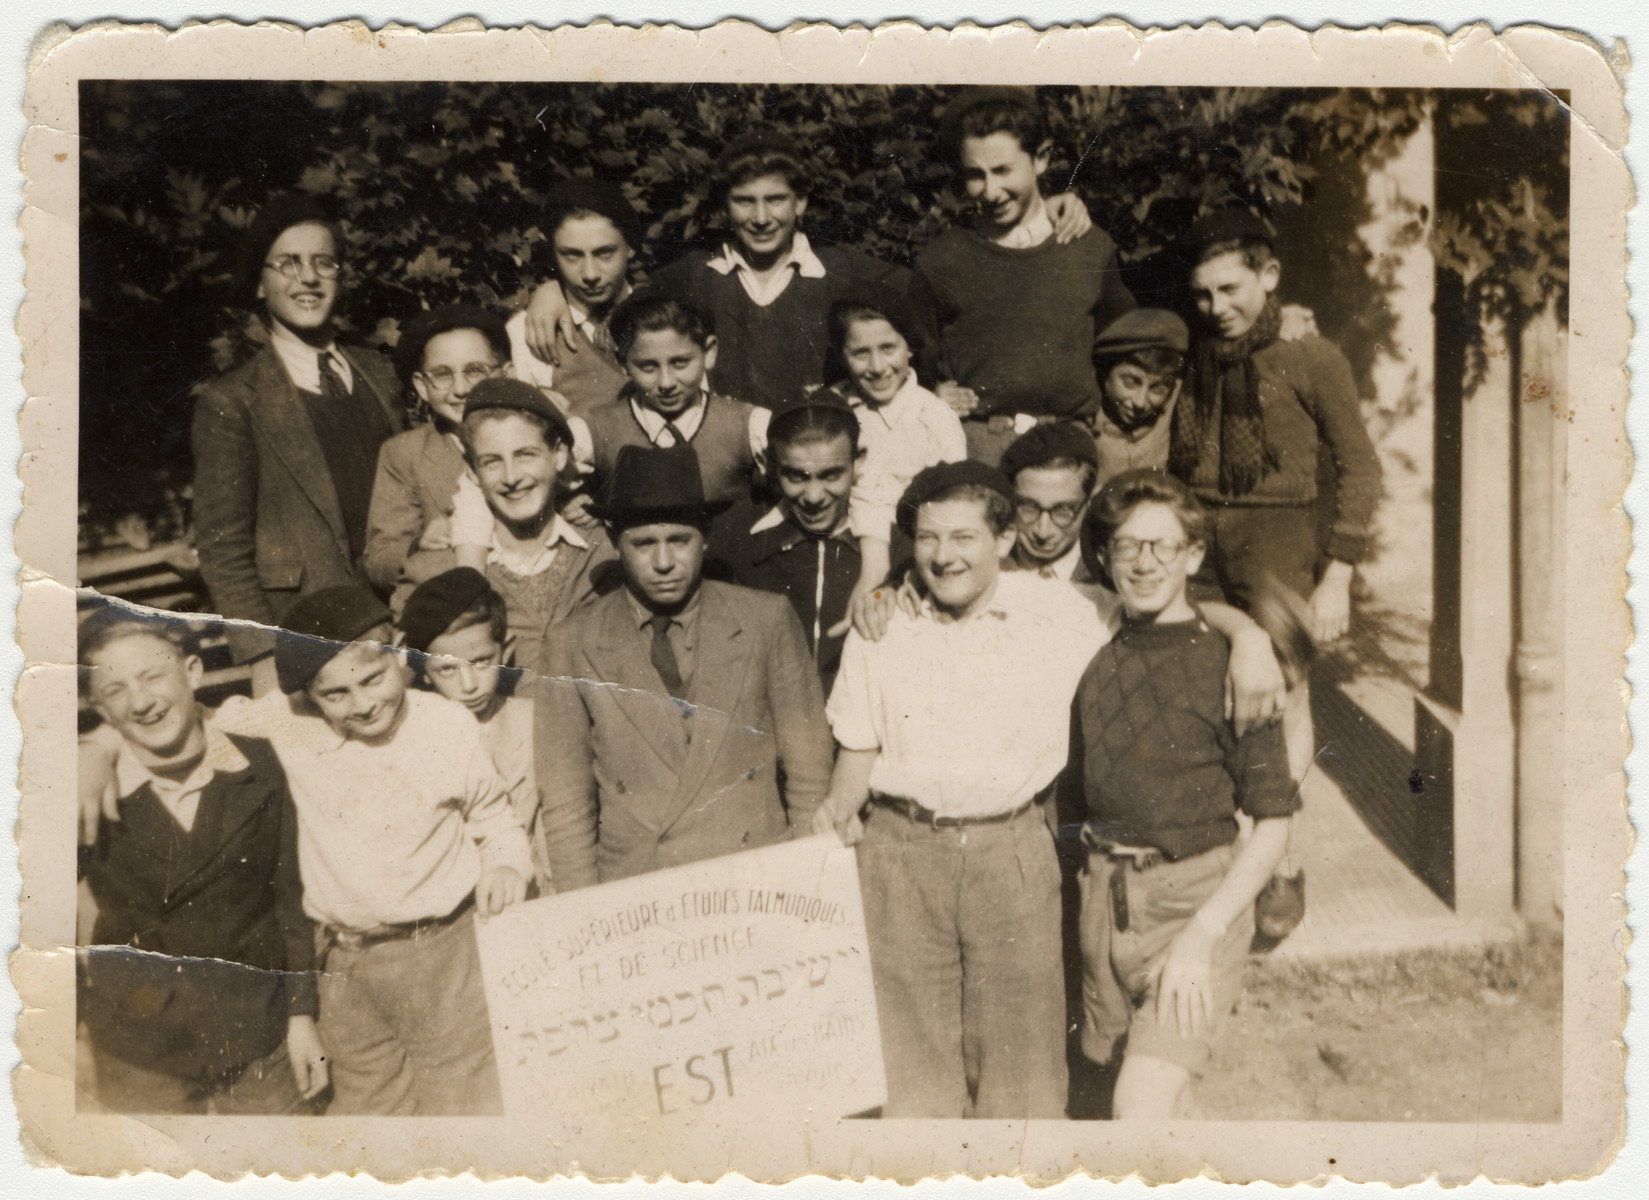 Group portrait of students in the Yeshiva Chochmei Tzorfat (scholars of France) in Aix-les-Bains.

Rabbi Chaikin is pictured in the center.  To his immediate right is Jacques (Jacko) Klein.